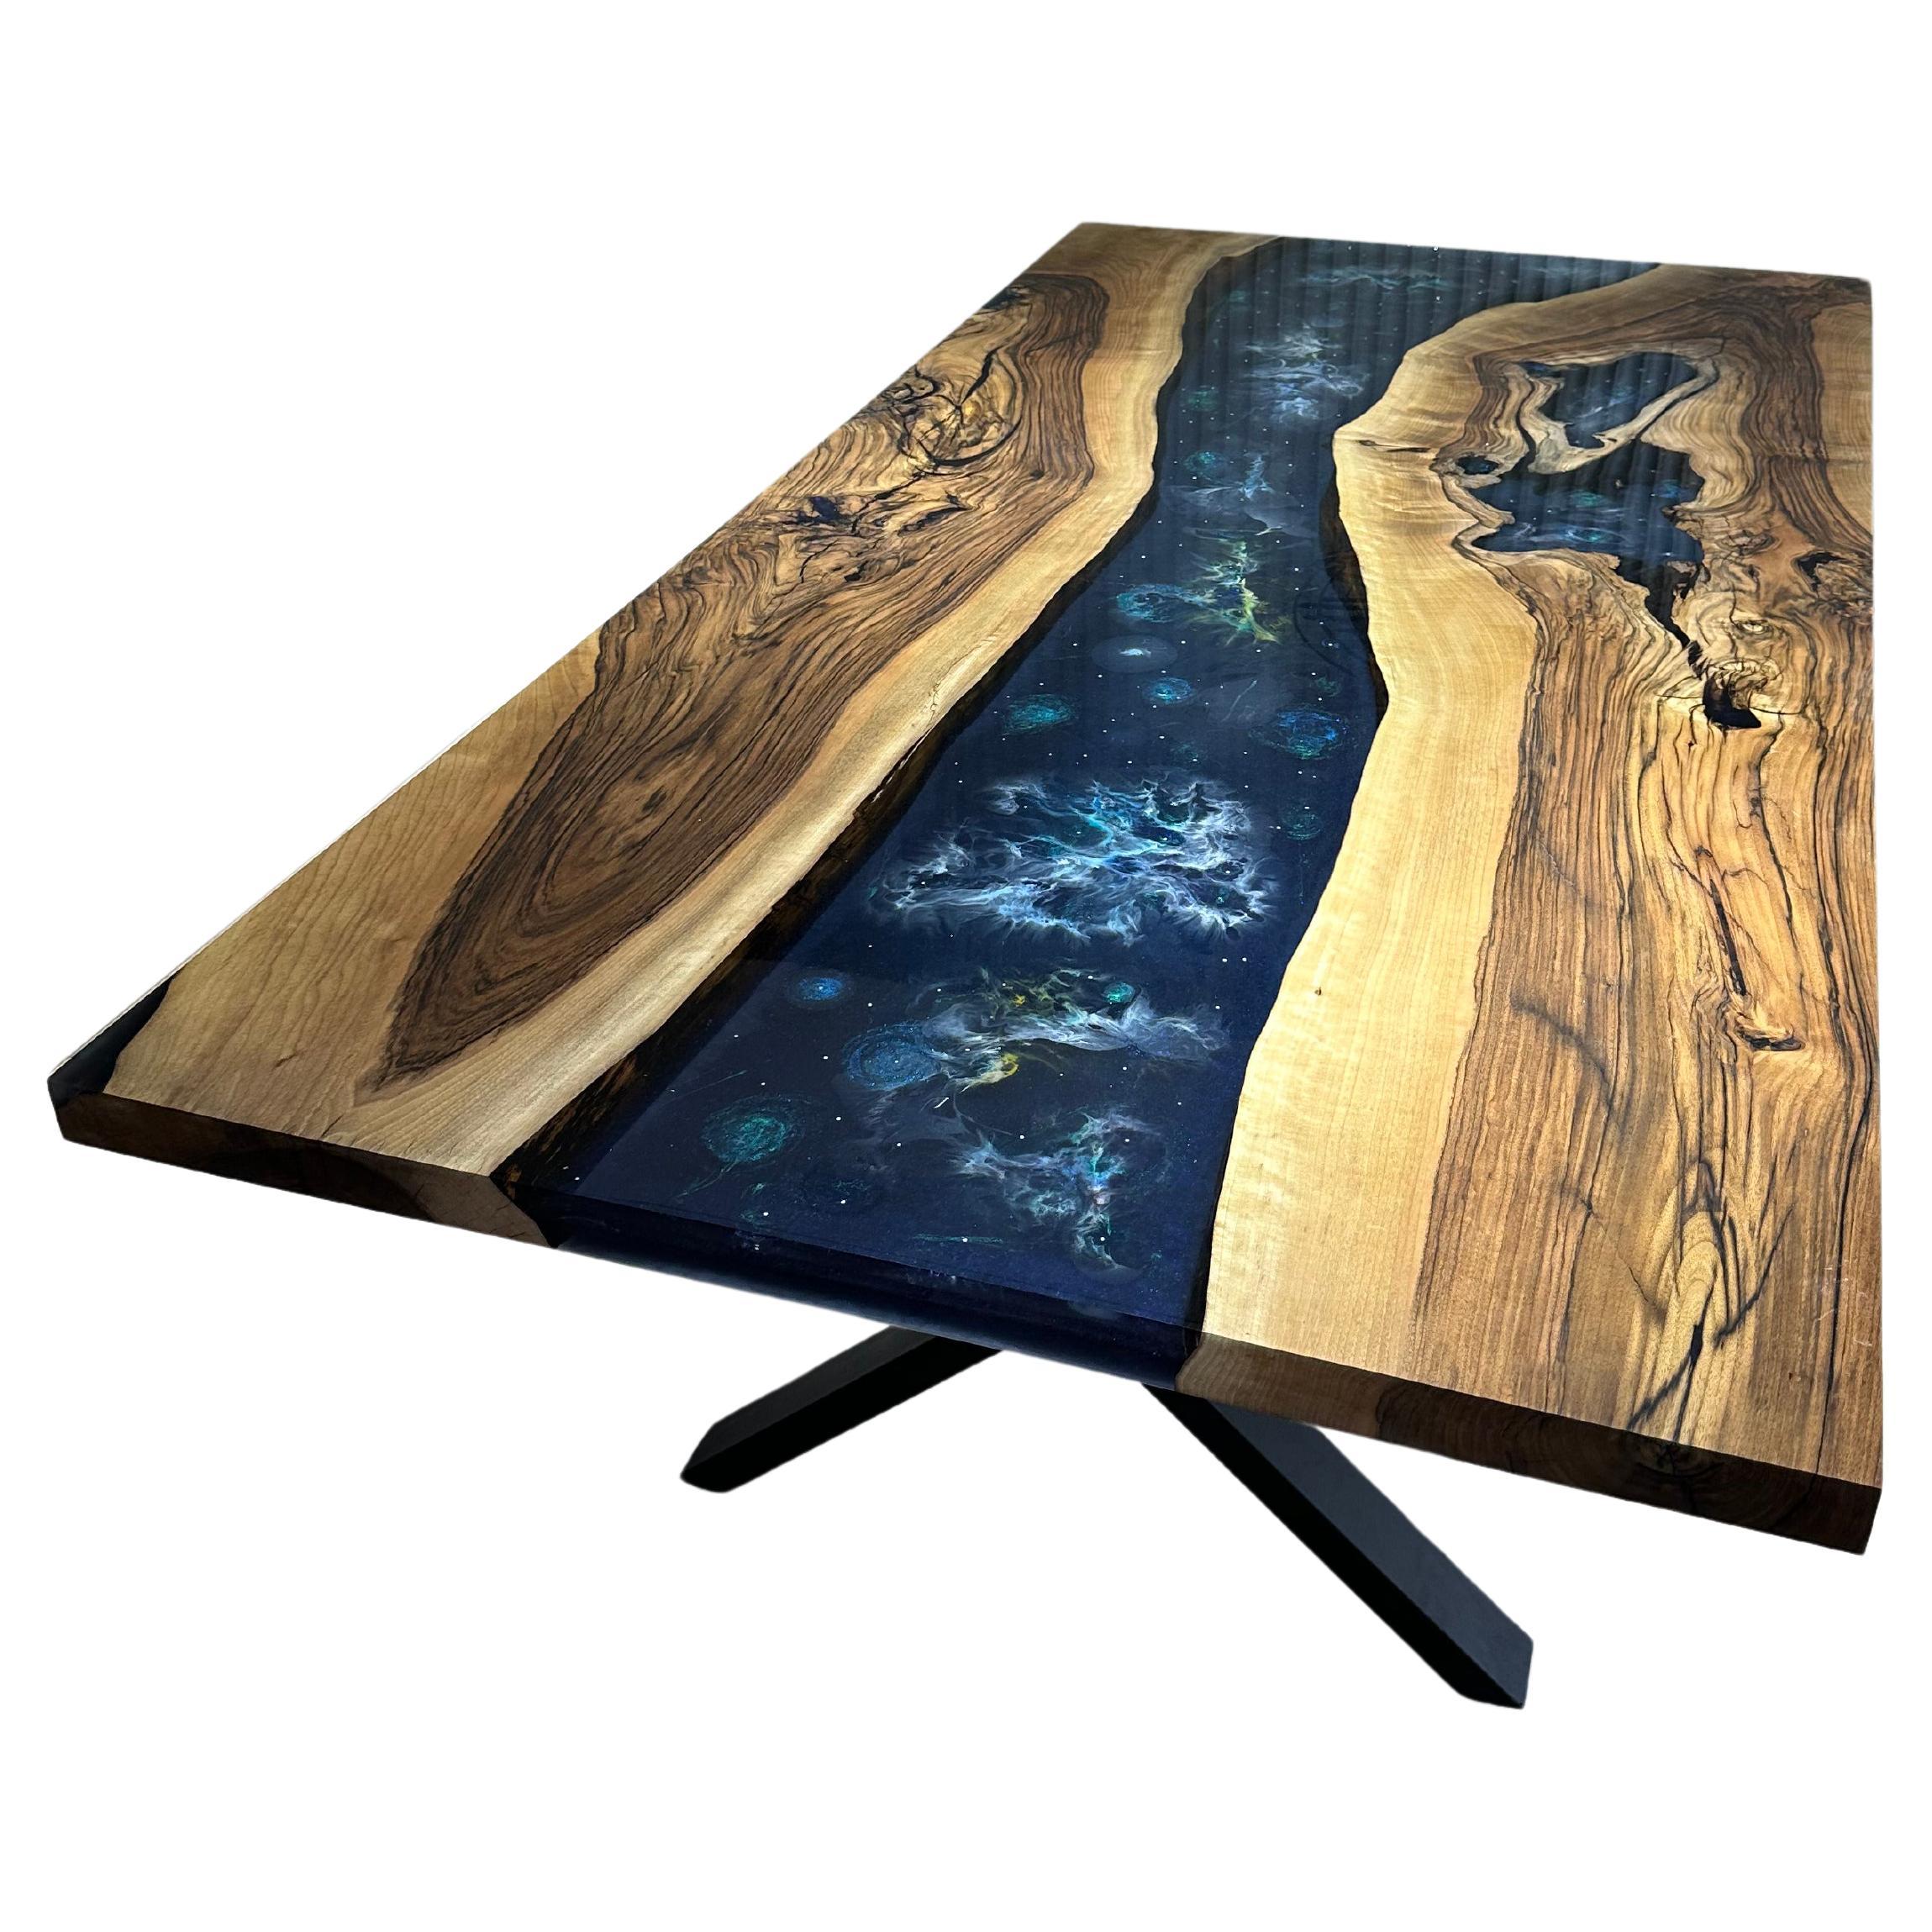 Space Epoxy Resin River Dining Table Live Edge Walnut Wood For Sale